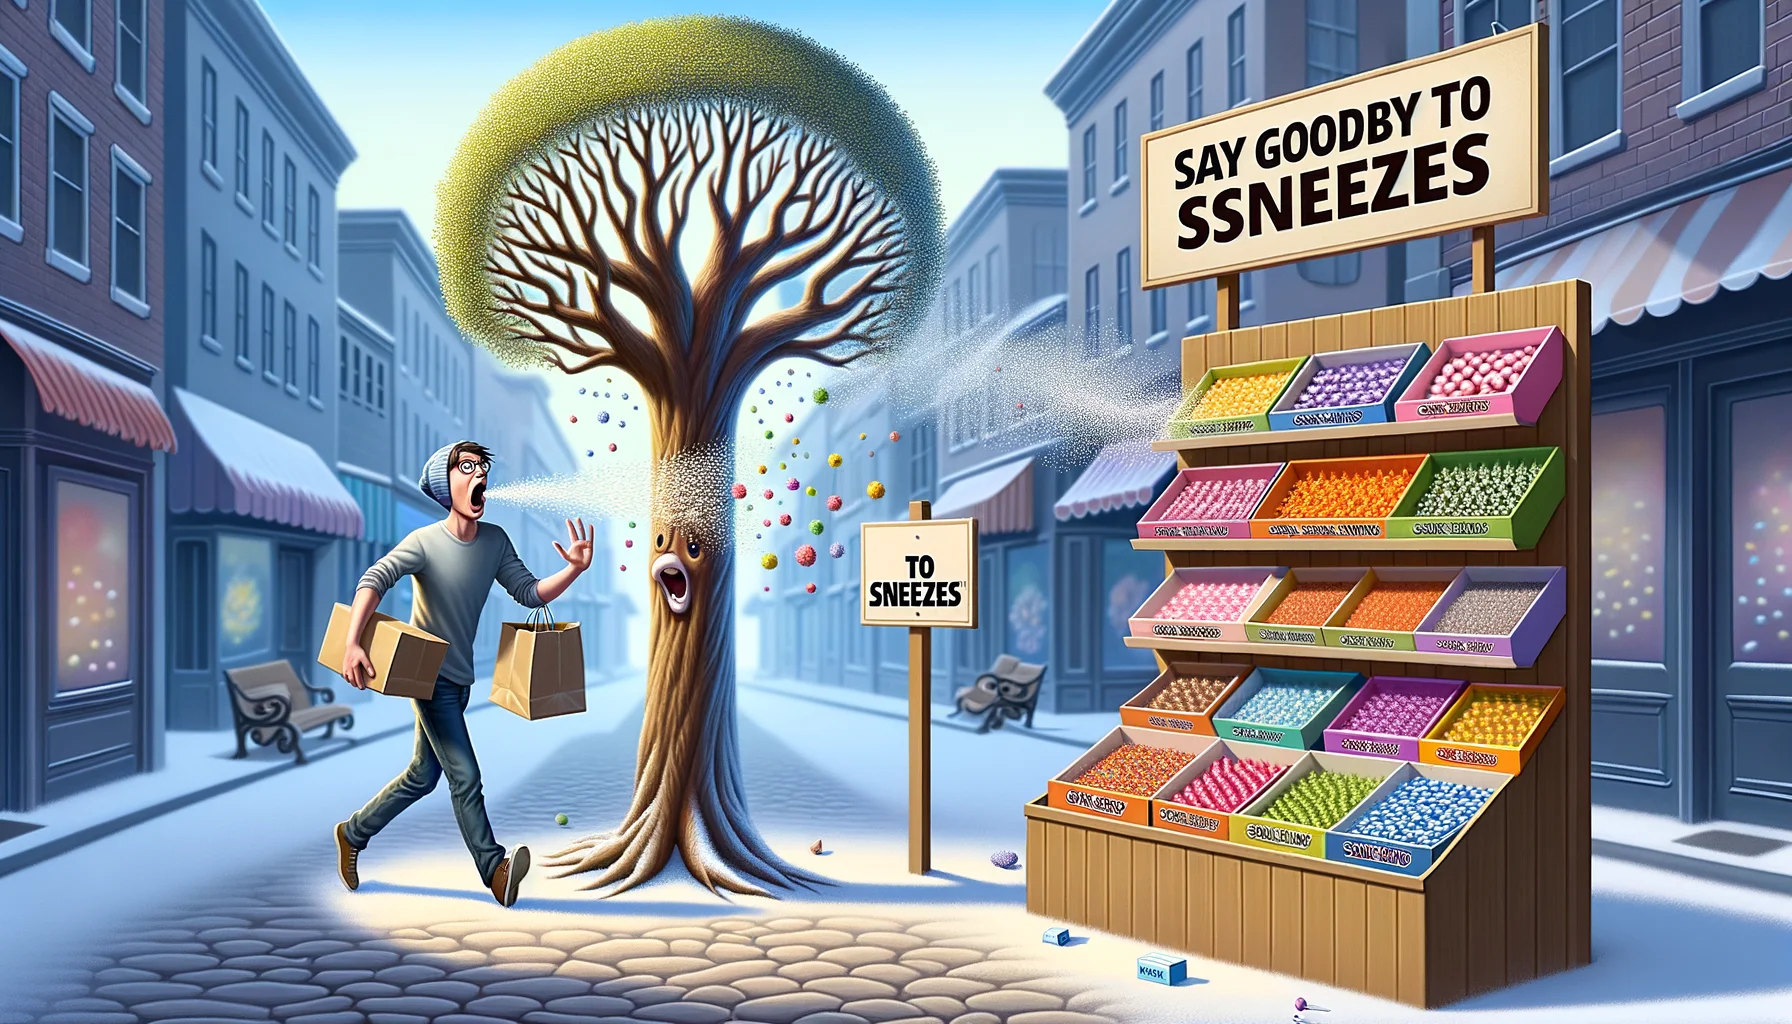 Imagine an amusingly realistic scenario that adeptly illustrates the concept of 'Candy for Managing Seasonal Allergies'. Frame a display of vibrant candy boxes under a banner saying 'Say Goodbye to Sneezes'. Amidst them stands an elegantly caricatured tree sprinkling its pollen with one branch while holding its own box of candy in the other. Near the tree, visualize a person of Caucasian descent, a customer, with wide eyes and mouth agape in surprise, holding a box of candy in one hand and a tissue in the other, about to burst into laughter. Nailed to the tree, depict an image of a before and after scene of a sneezing and smiling face.